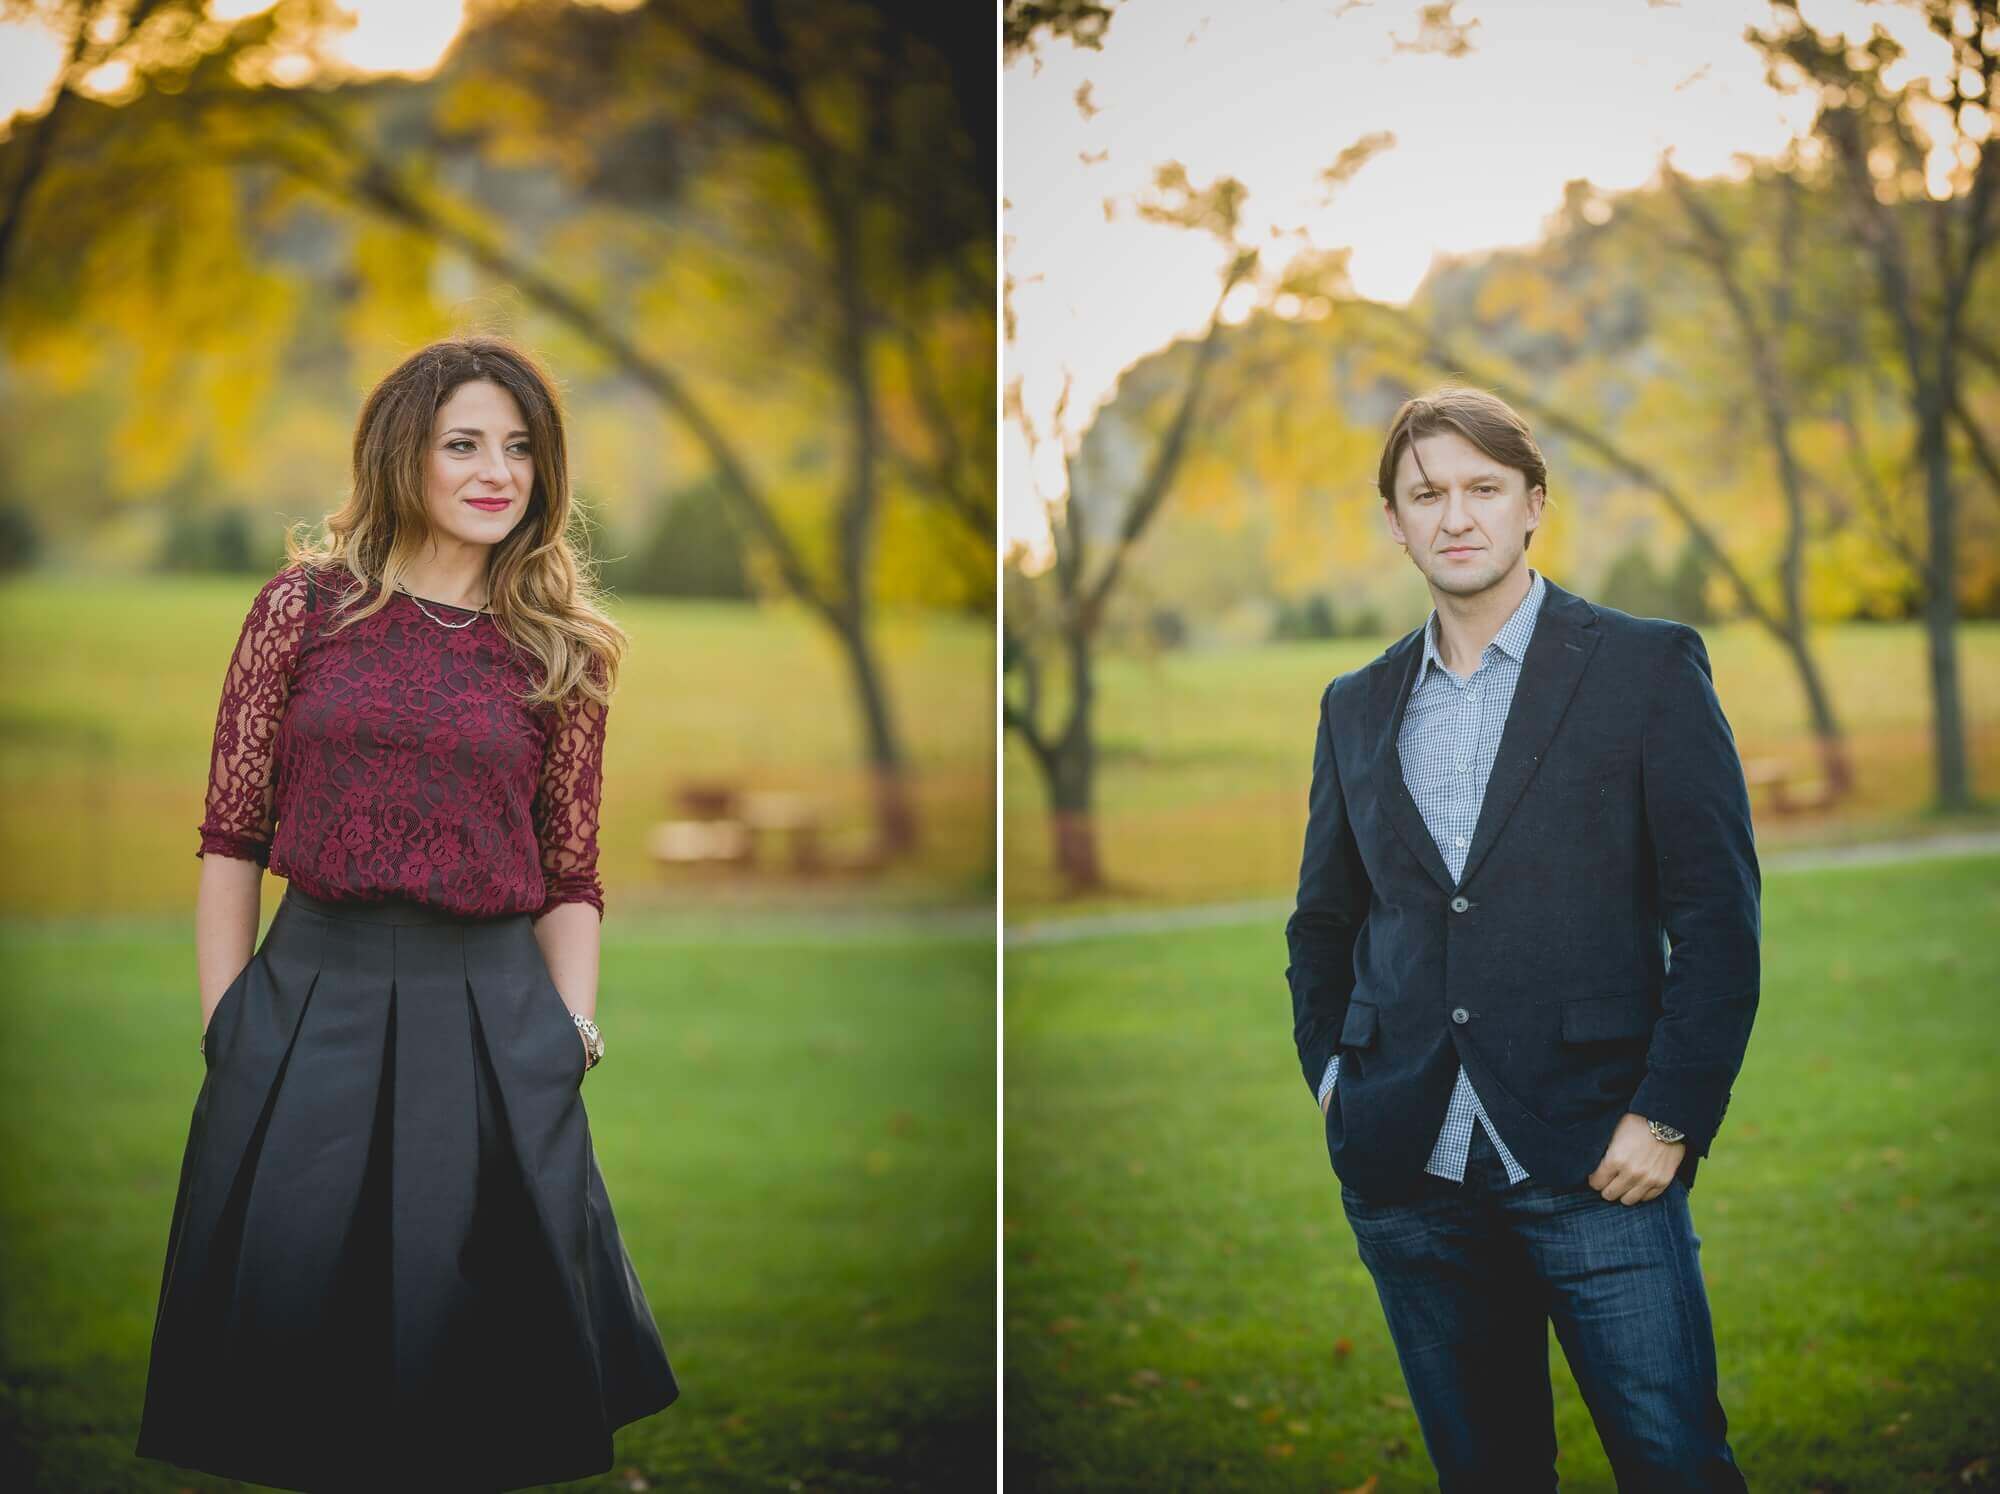 Simple and elegant portraits of the engaged couple at Scarborough Bluffs in Toronto